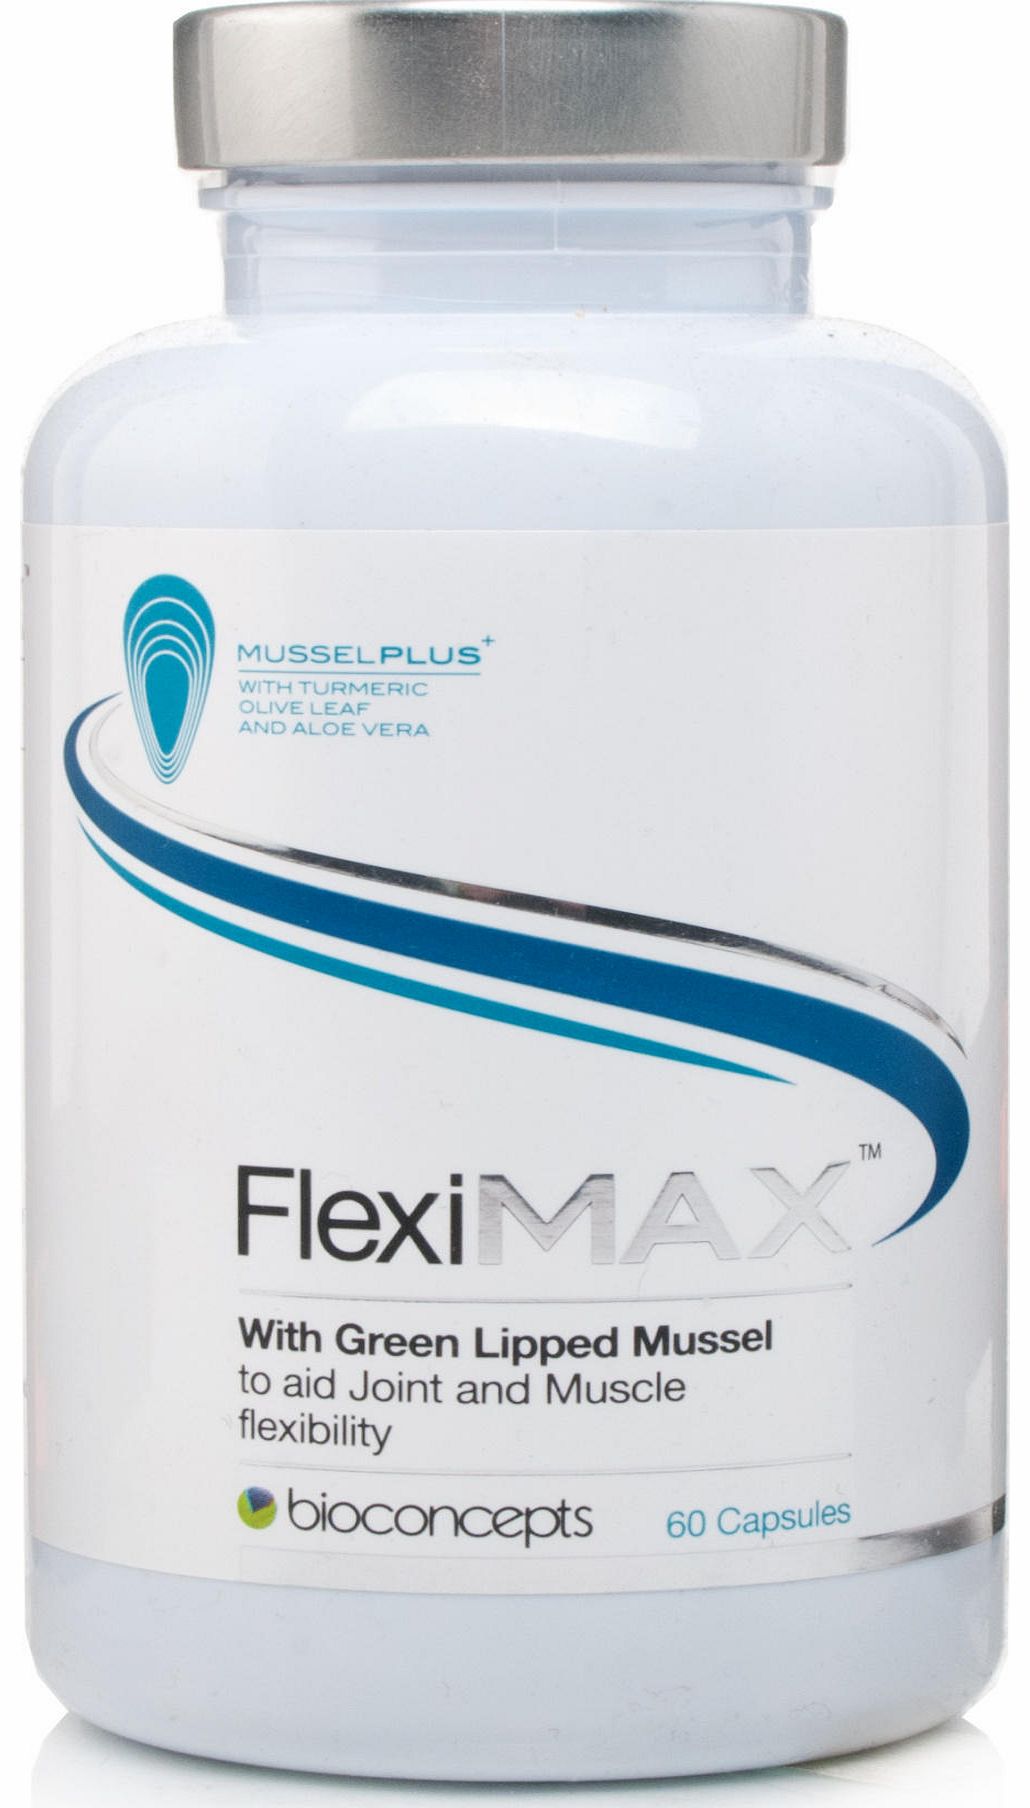 Bioconcepts FlexiMAX with Green Lipped Mussel